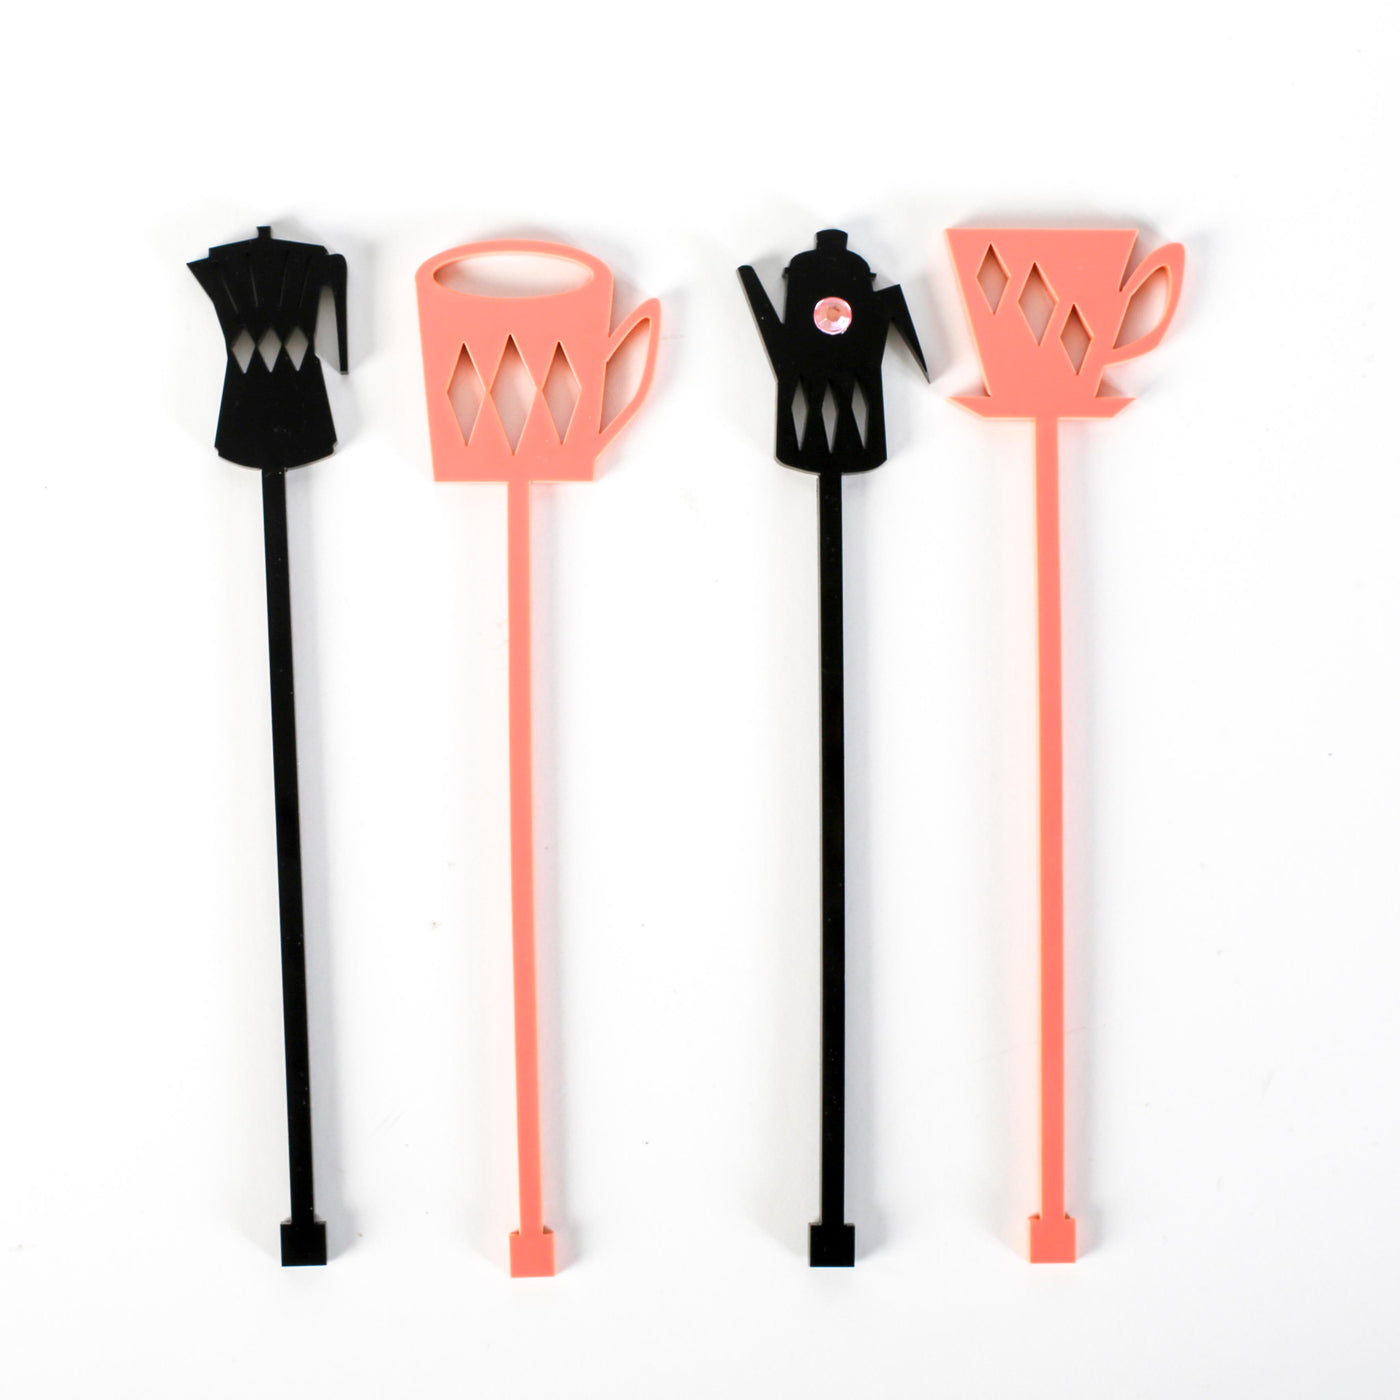 Create a festive cocktail with these pink Retro Coffee Swizzle Stix drink stirrers! Perfect for cocktails, coffee bar, or impromptu celebrations, these acrylic drink stirrers add fun to any drink. Washable and reusable makes them an eco friendly option. Rhinestone detail adds a unique flair. Makes a great gift for coffee lovers, newlyweds, happy housewarming, birthdays and bachelorettes.